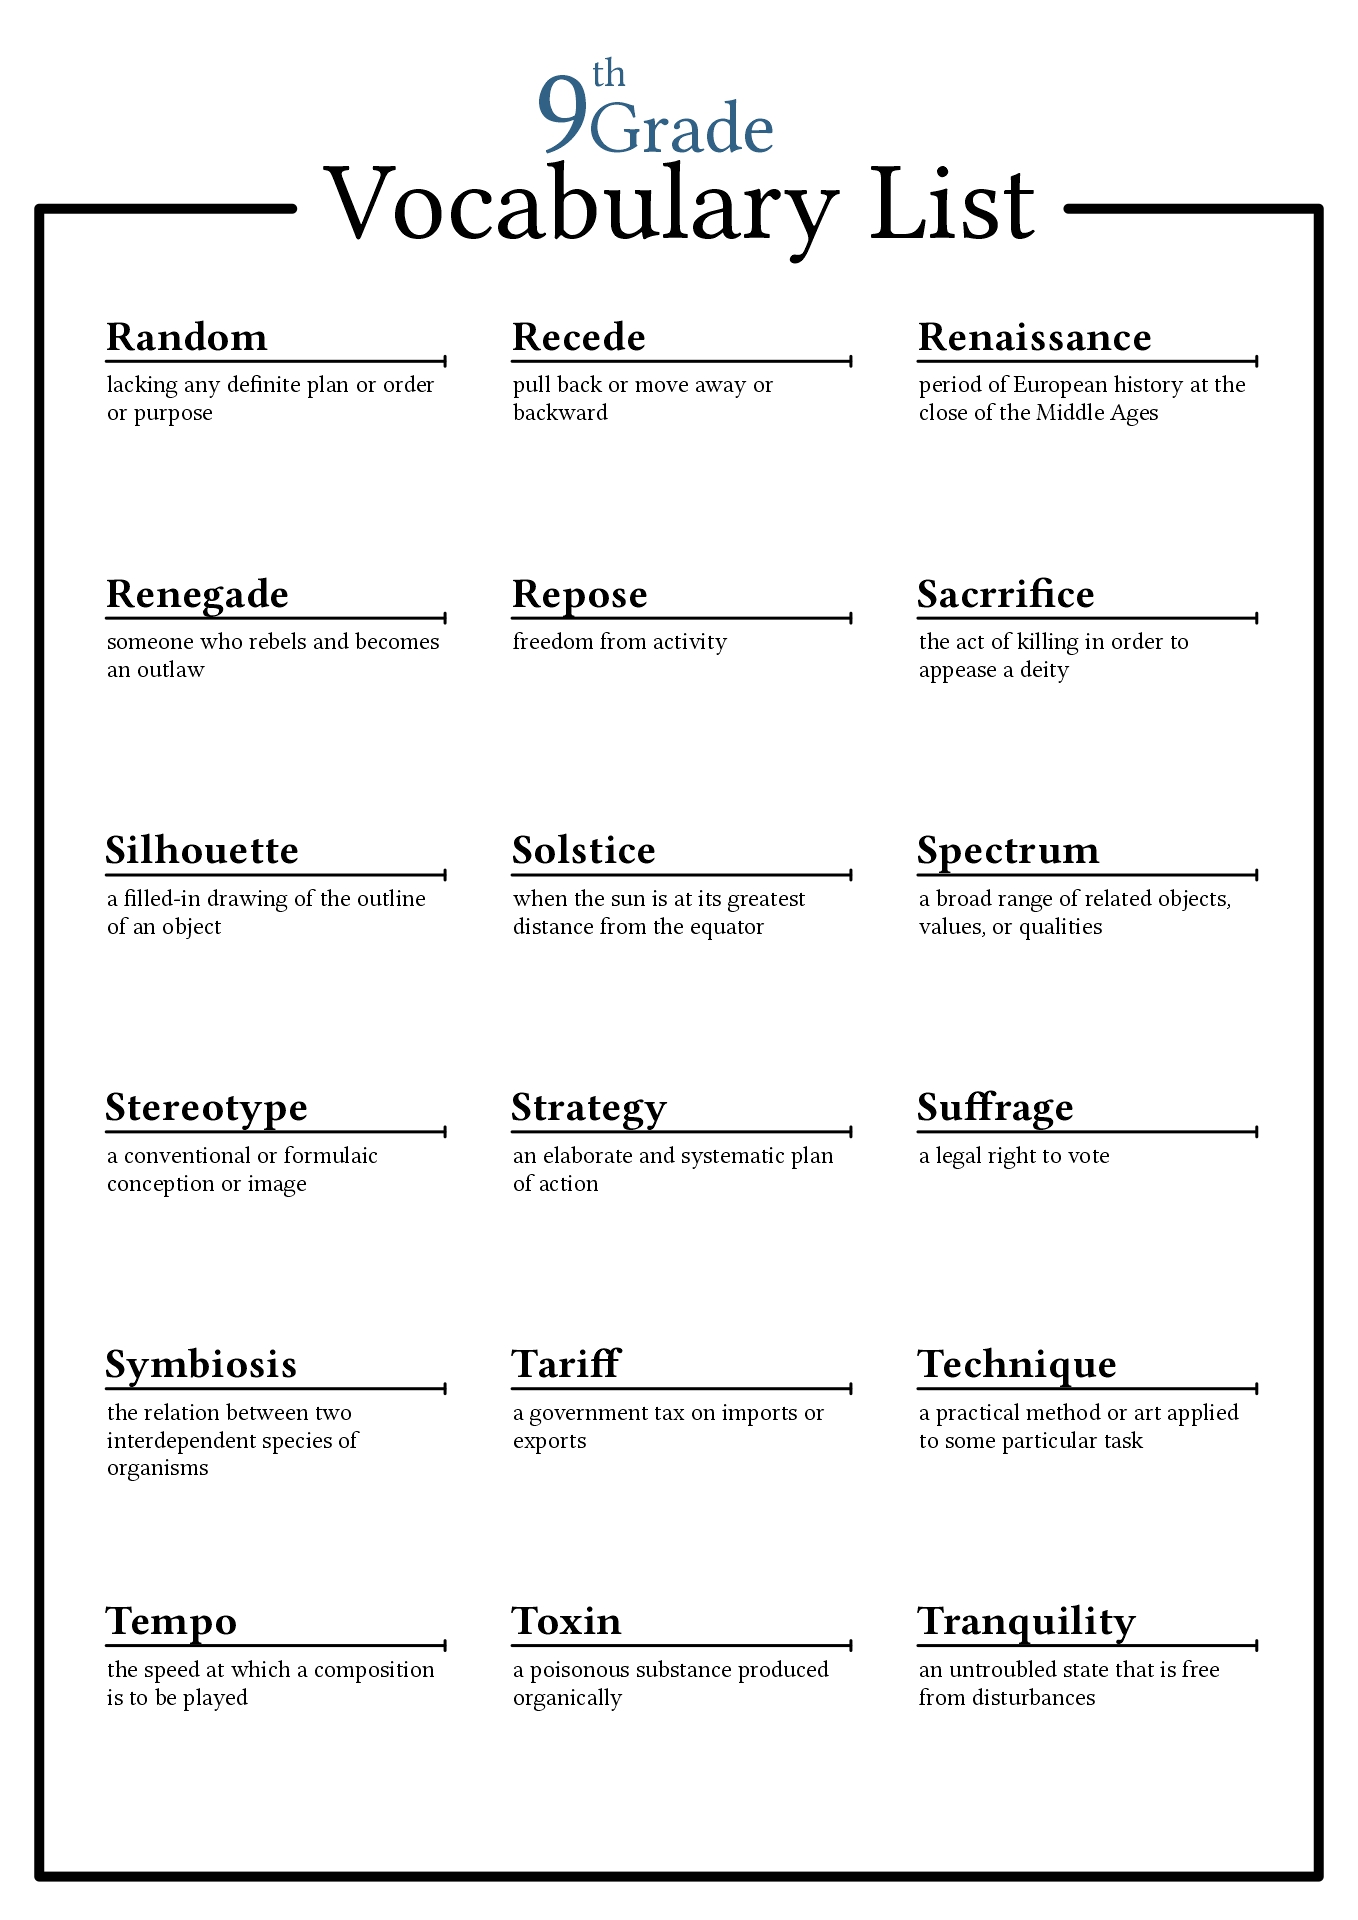 17-best-images-of-9th-grade-worksheets-spelling-words-9th-grade